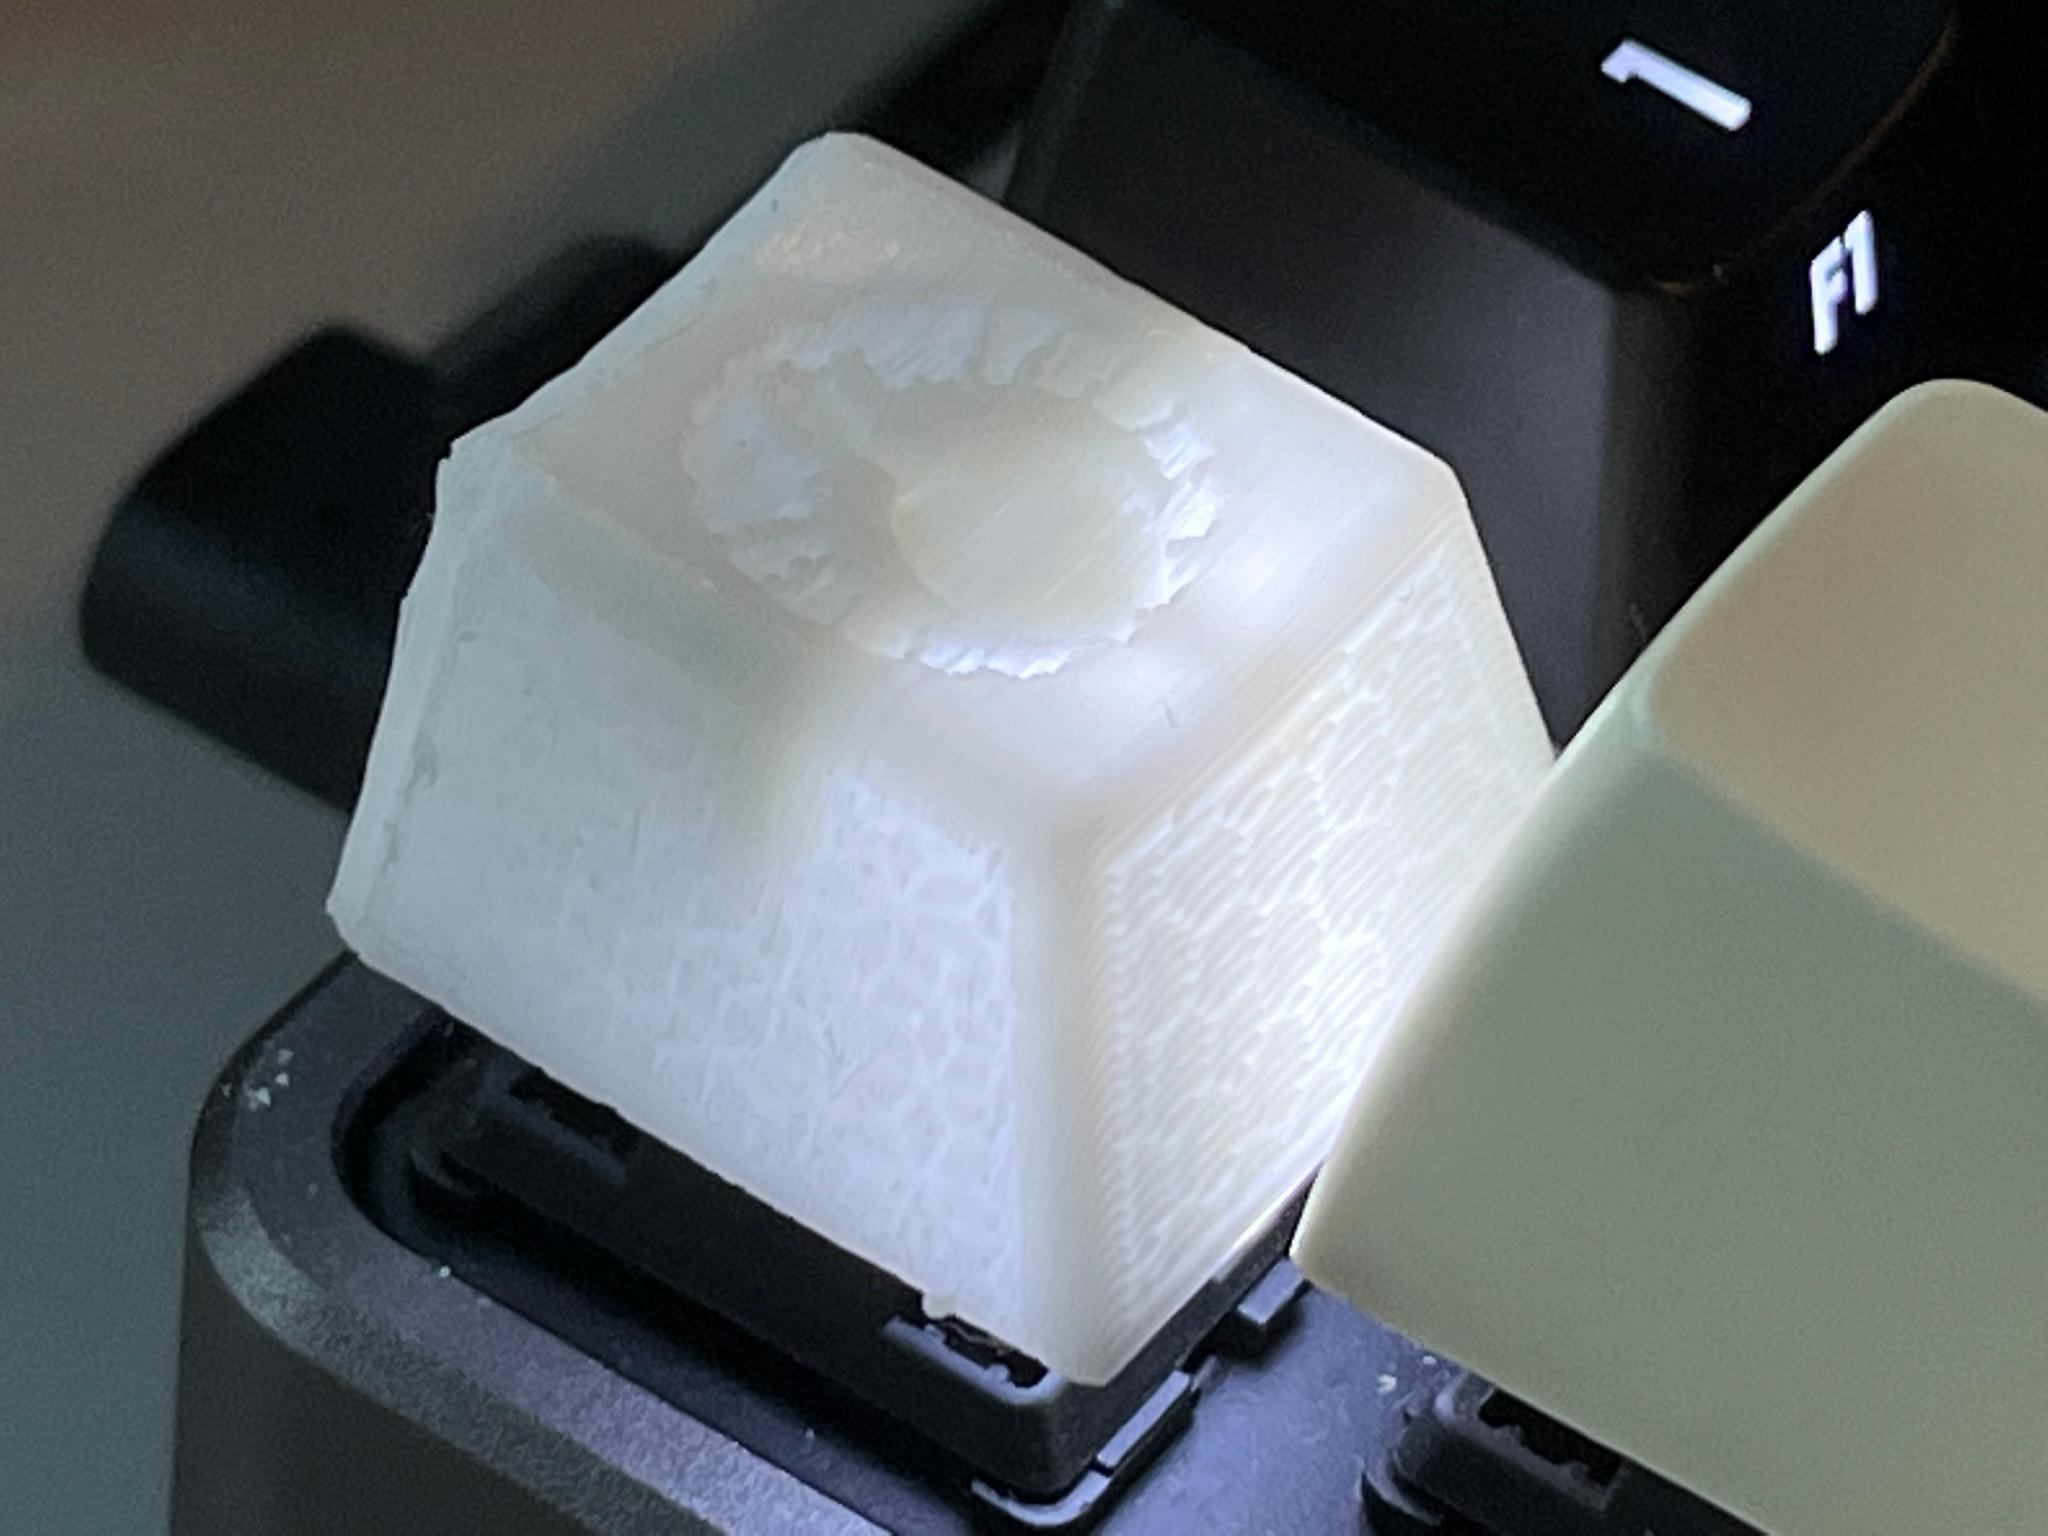 Ender 5 printed keycap attached to keyboard